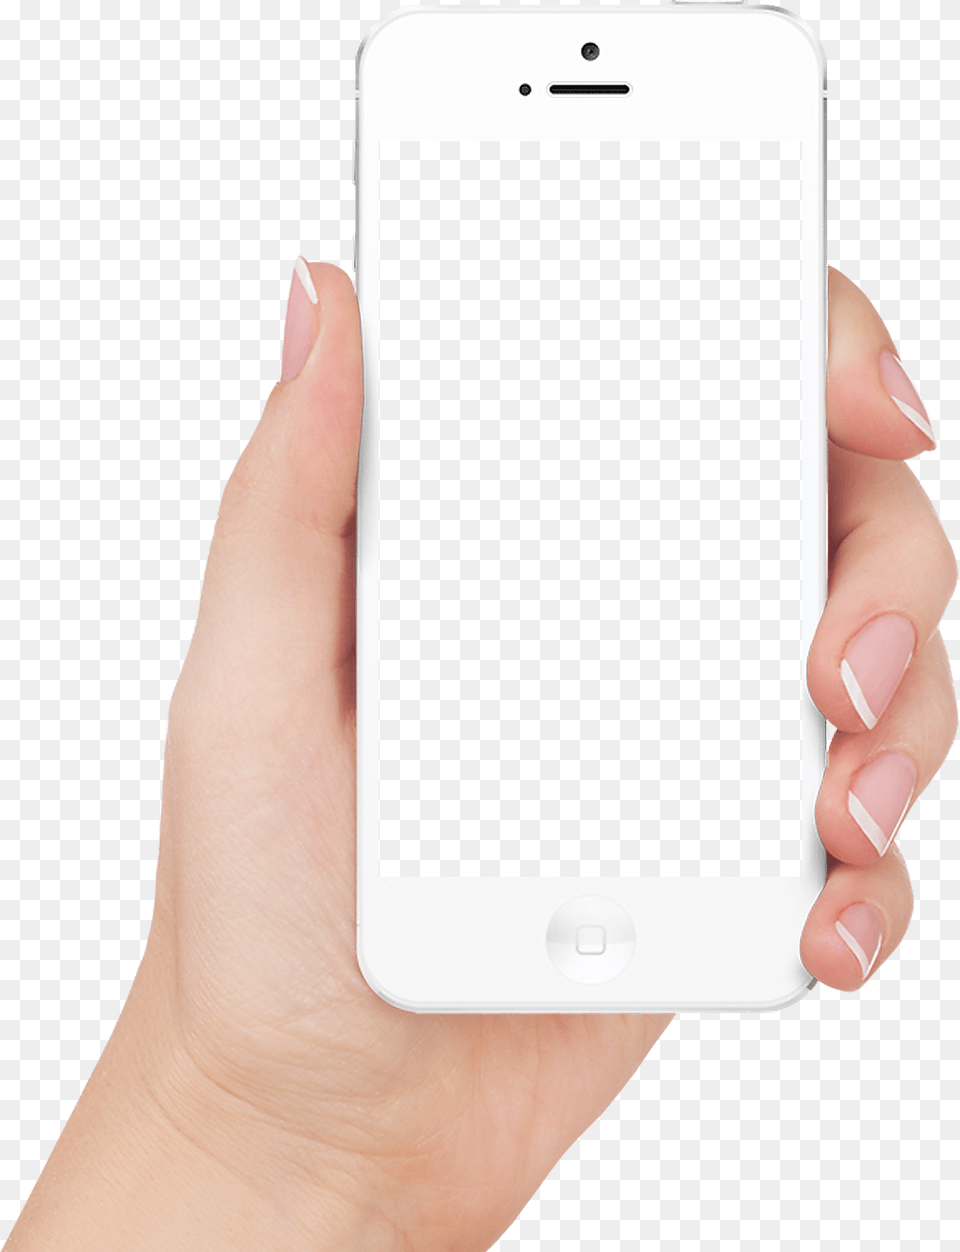 Phone Hand, Electronics, Mobile Phone, Iphone Png Image